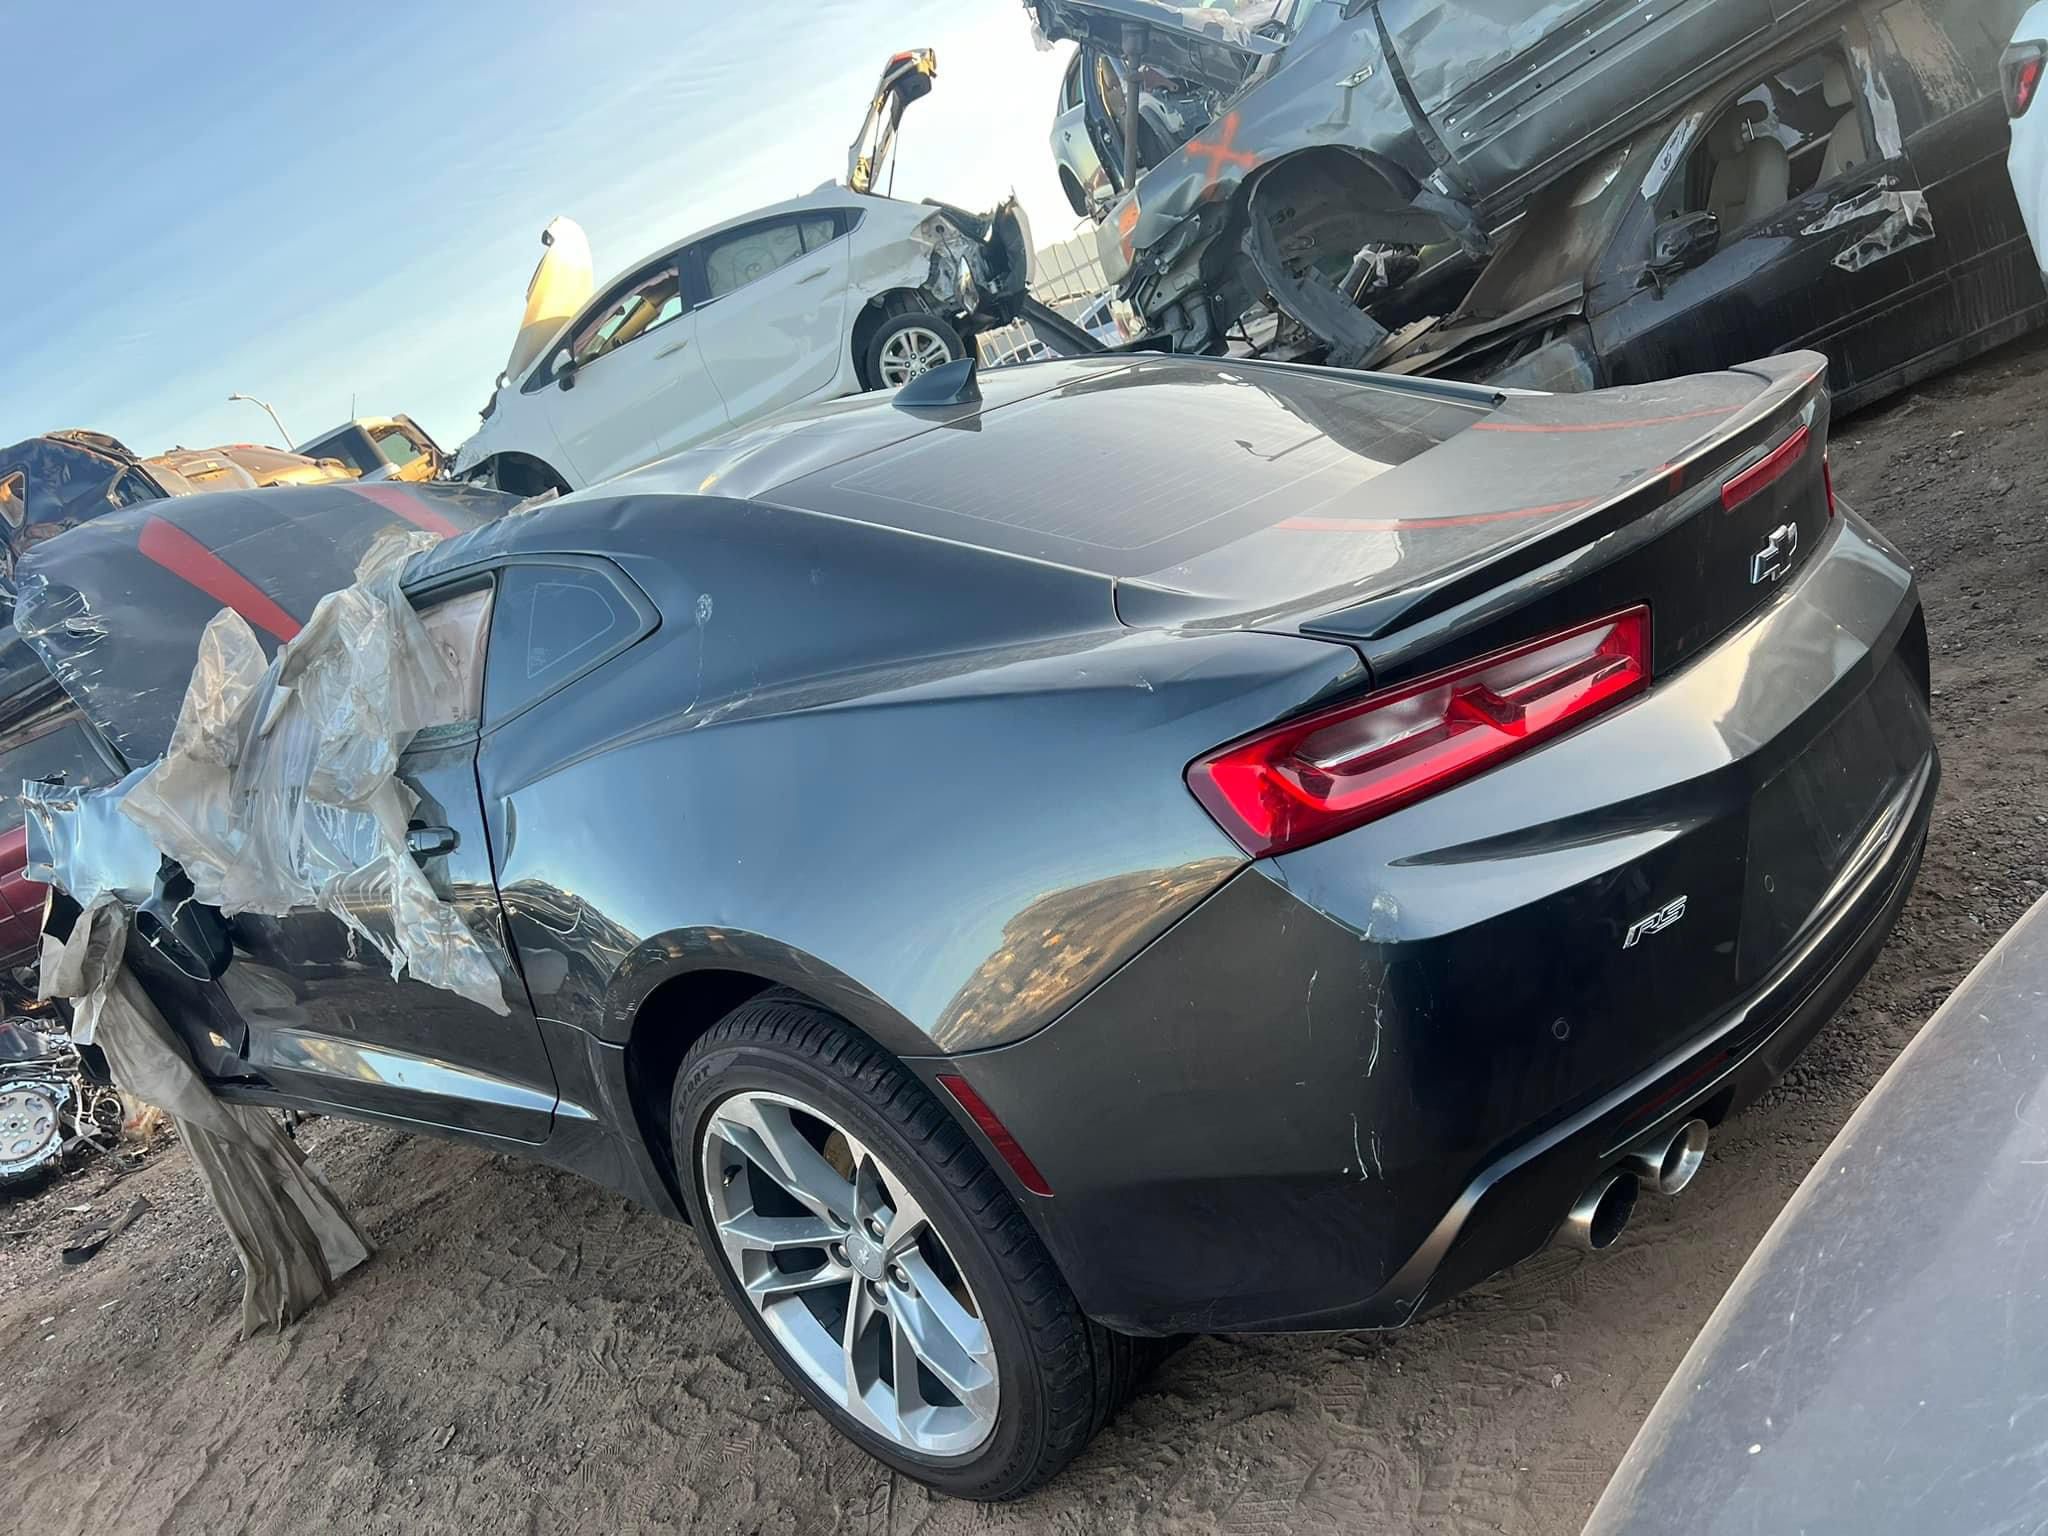 Chevy Camaro 2017 parts only